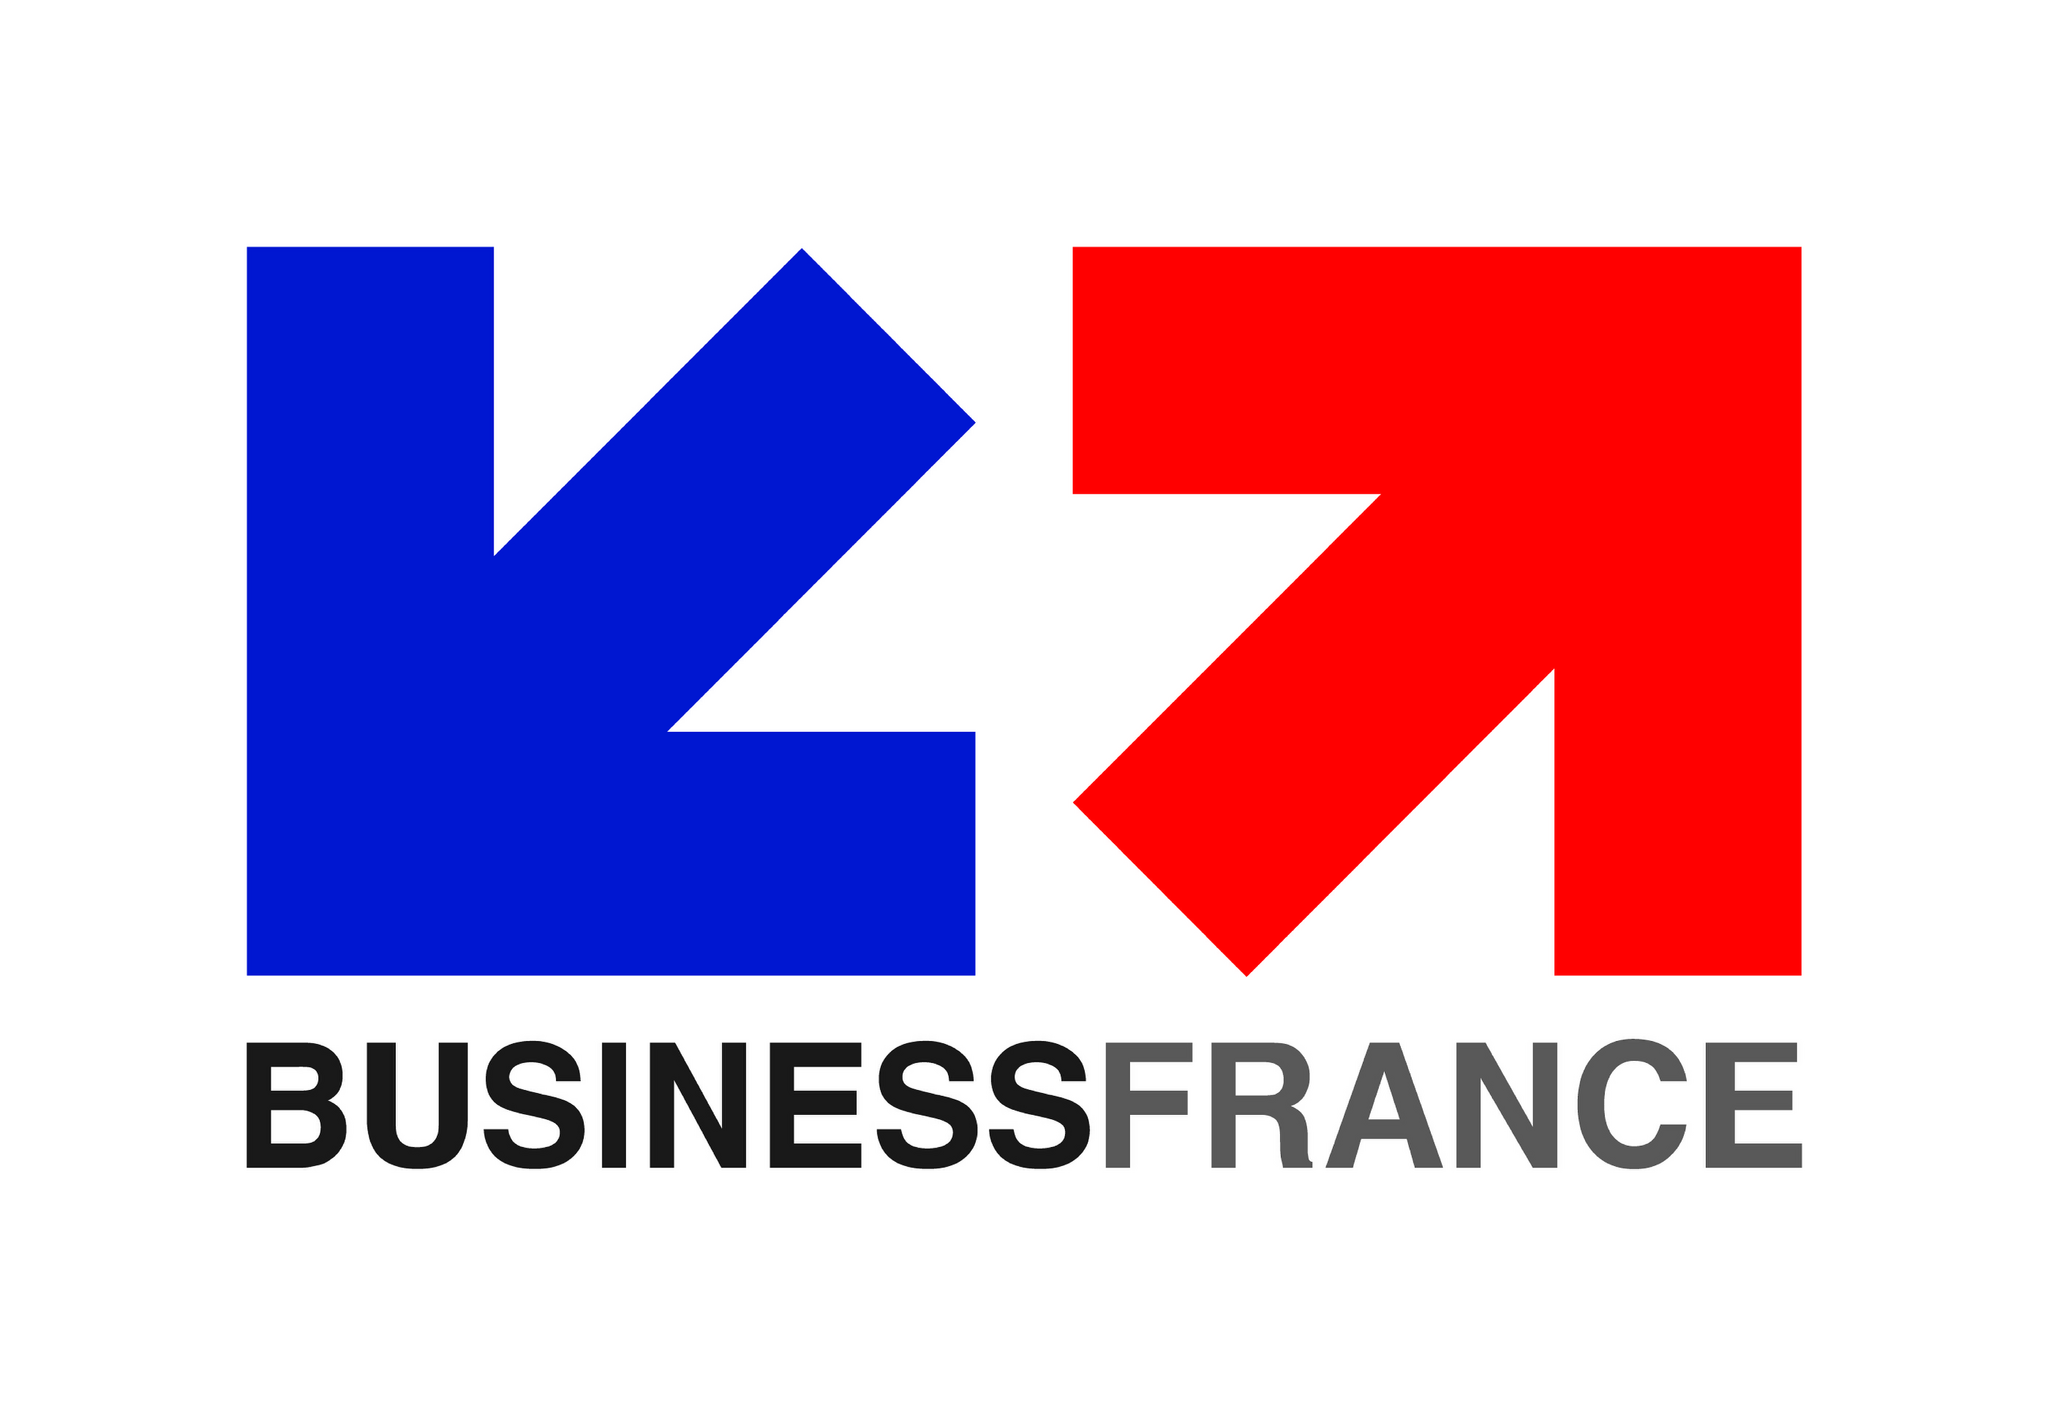 Red French Logo - BUSINESS FRANCE - Bett Show 2020, 22 - 25 January, ExCeL London ...